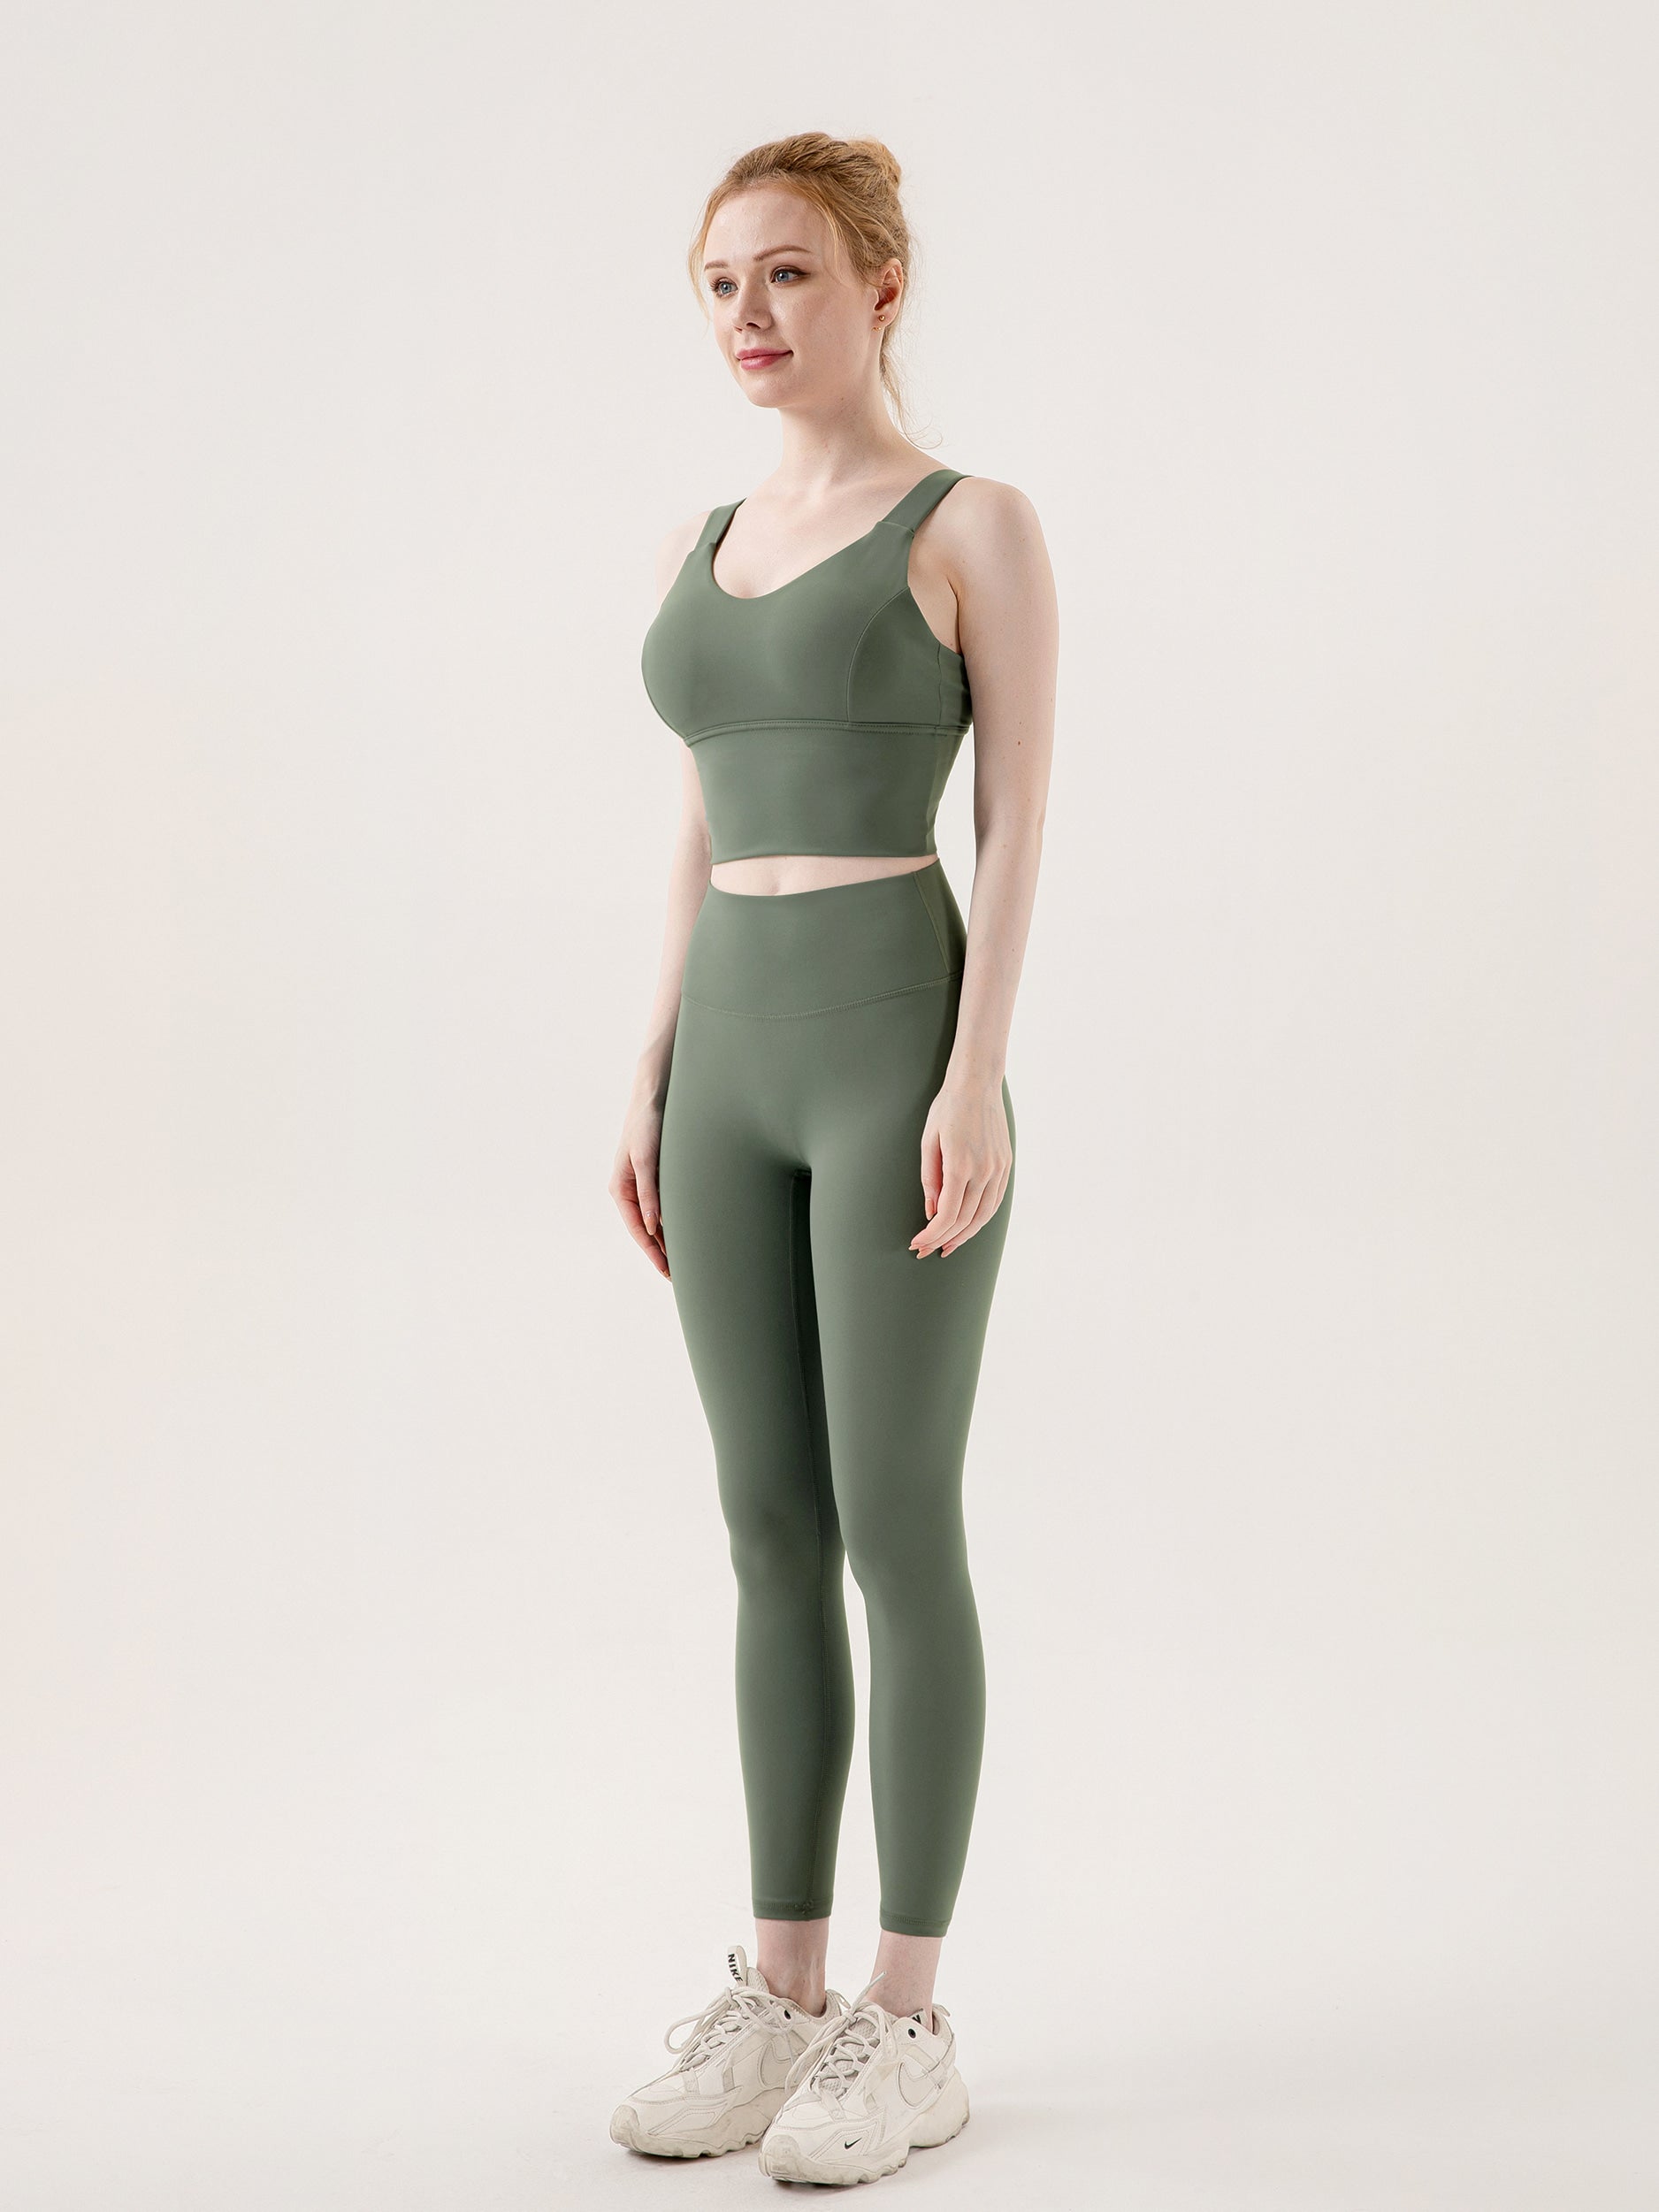 Vital 'n' Free Leggings - Core Olive: Breathe Easy, Move Freely – Click  Holic Activewear